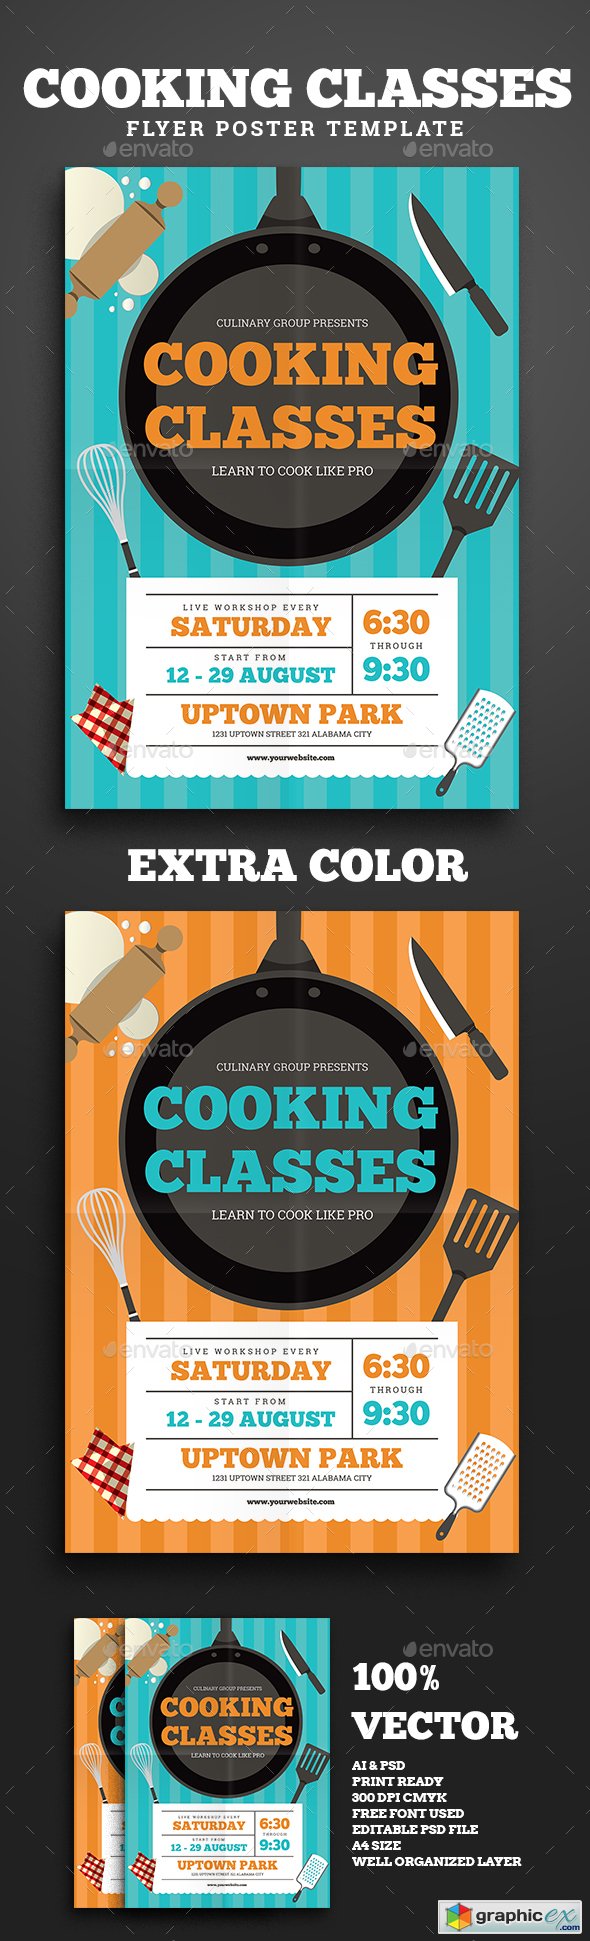 Cooking Classes Flyer